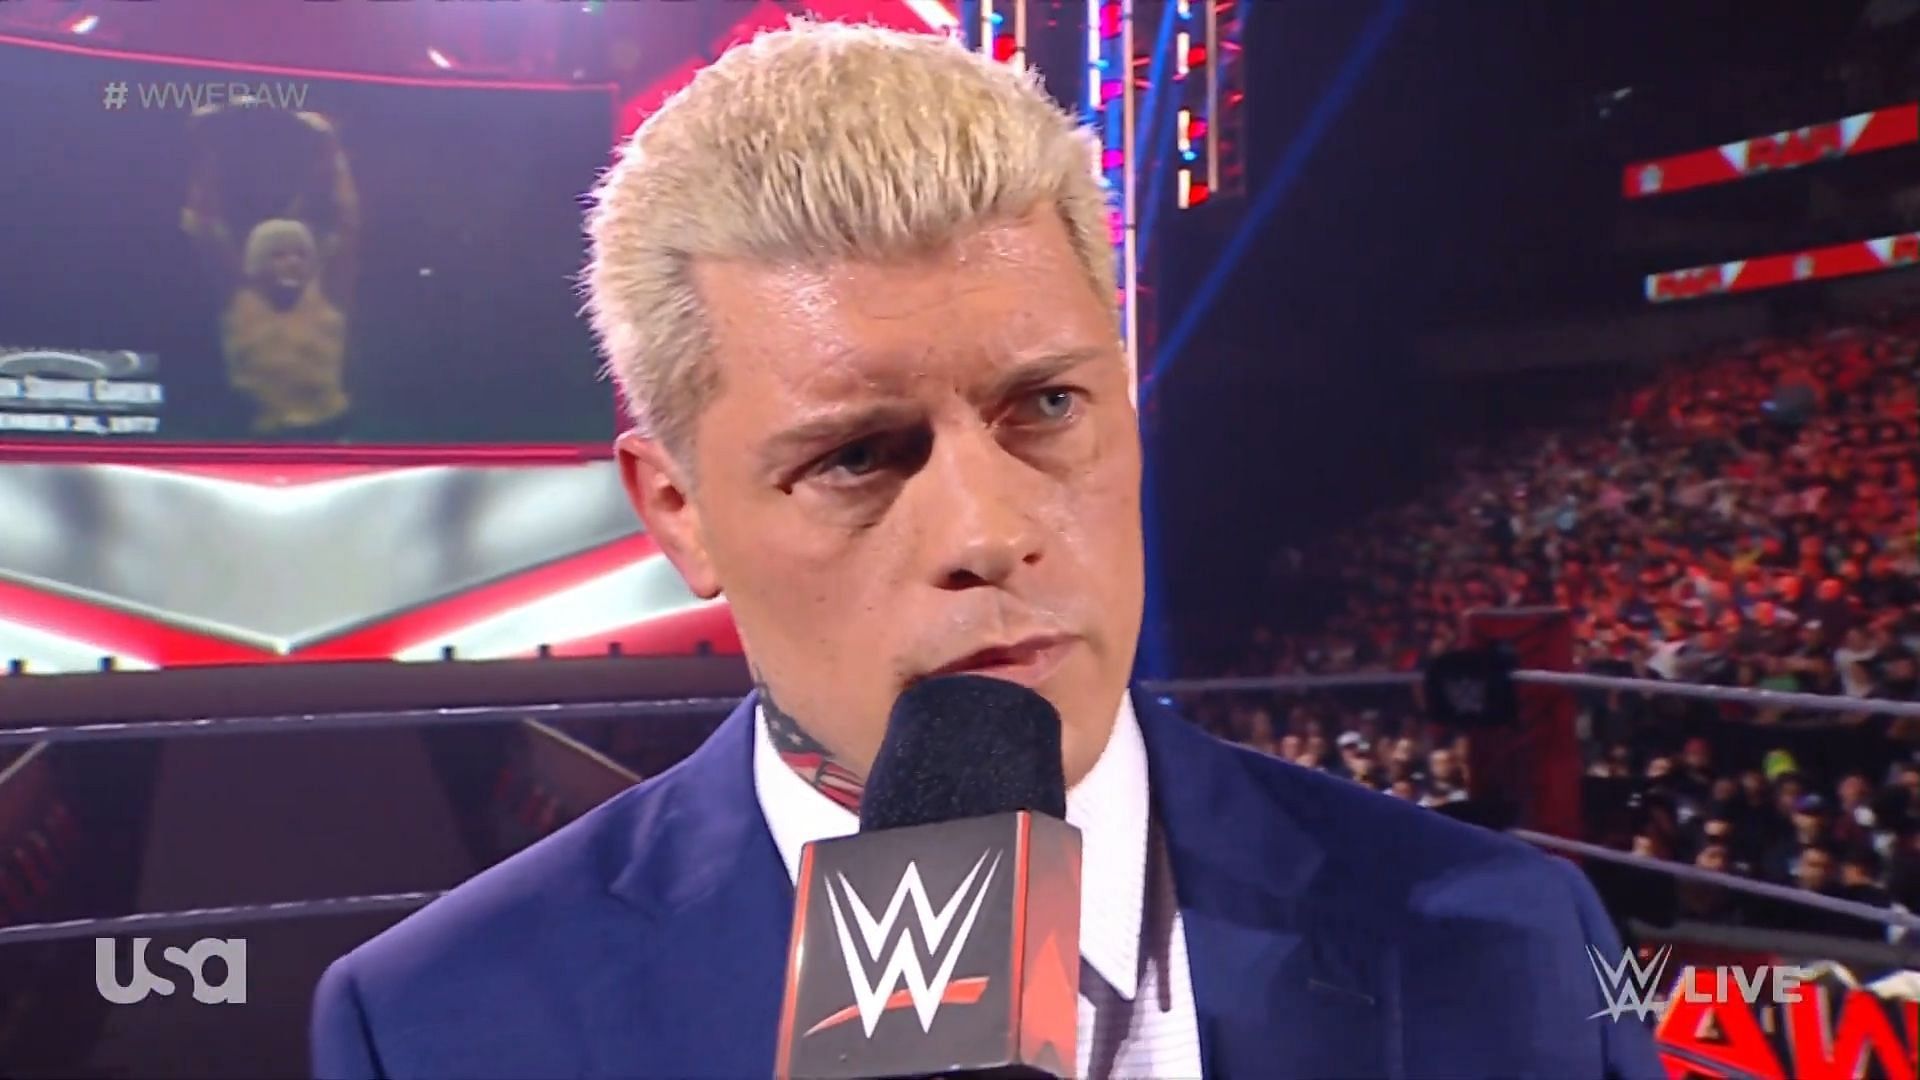 Cody Rhodes has been a key player on RAW since his return